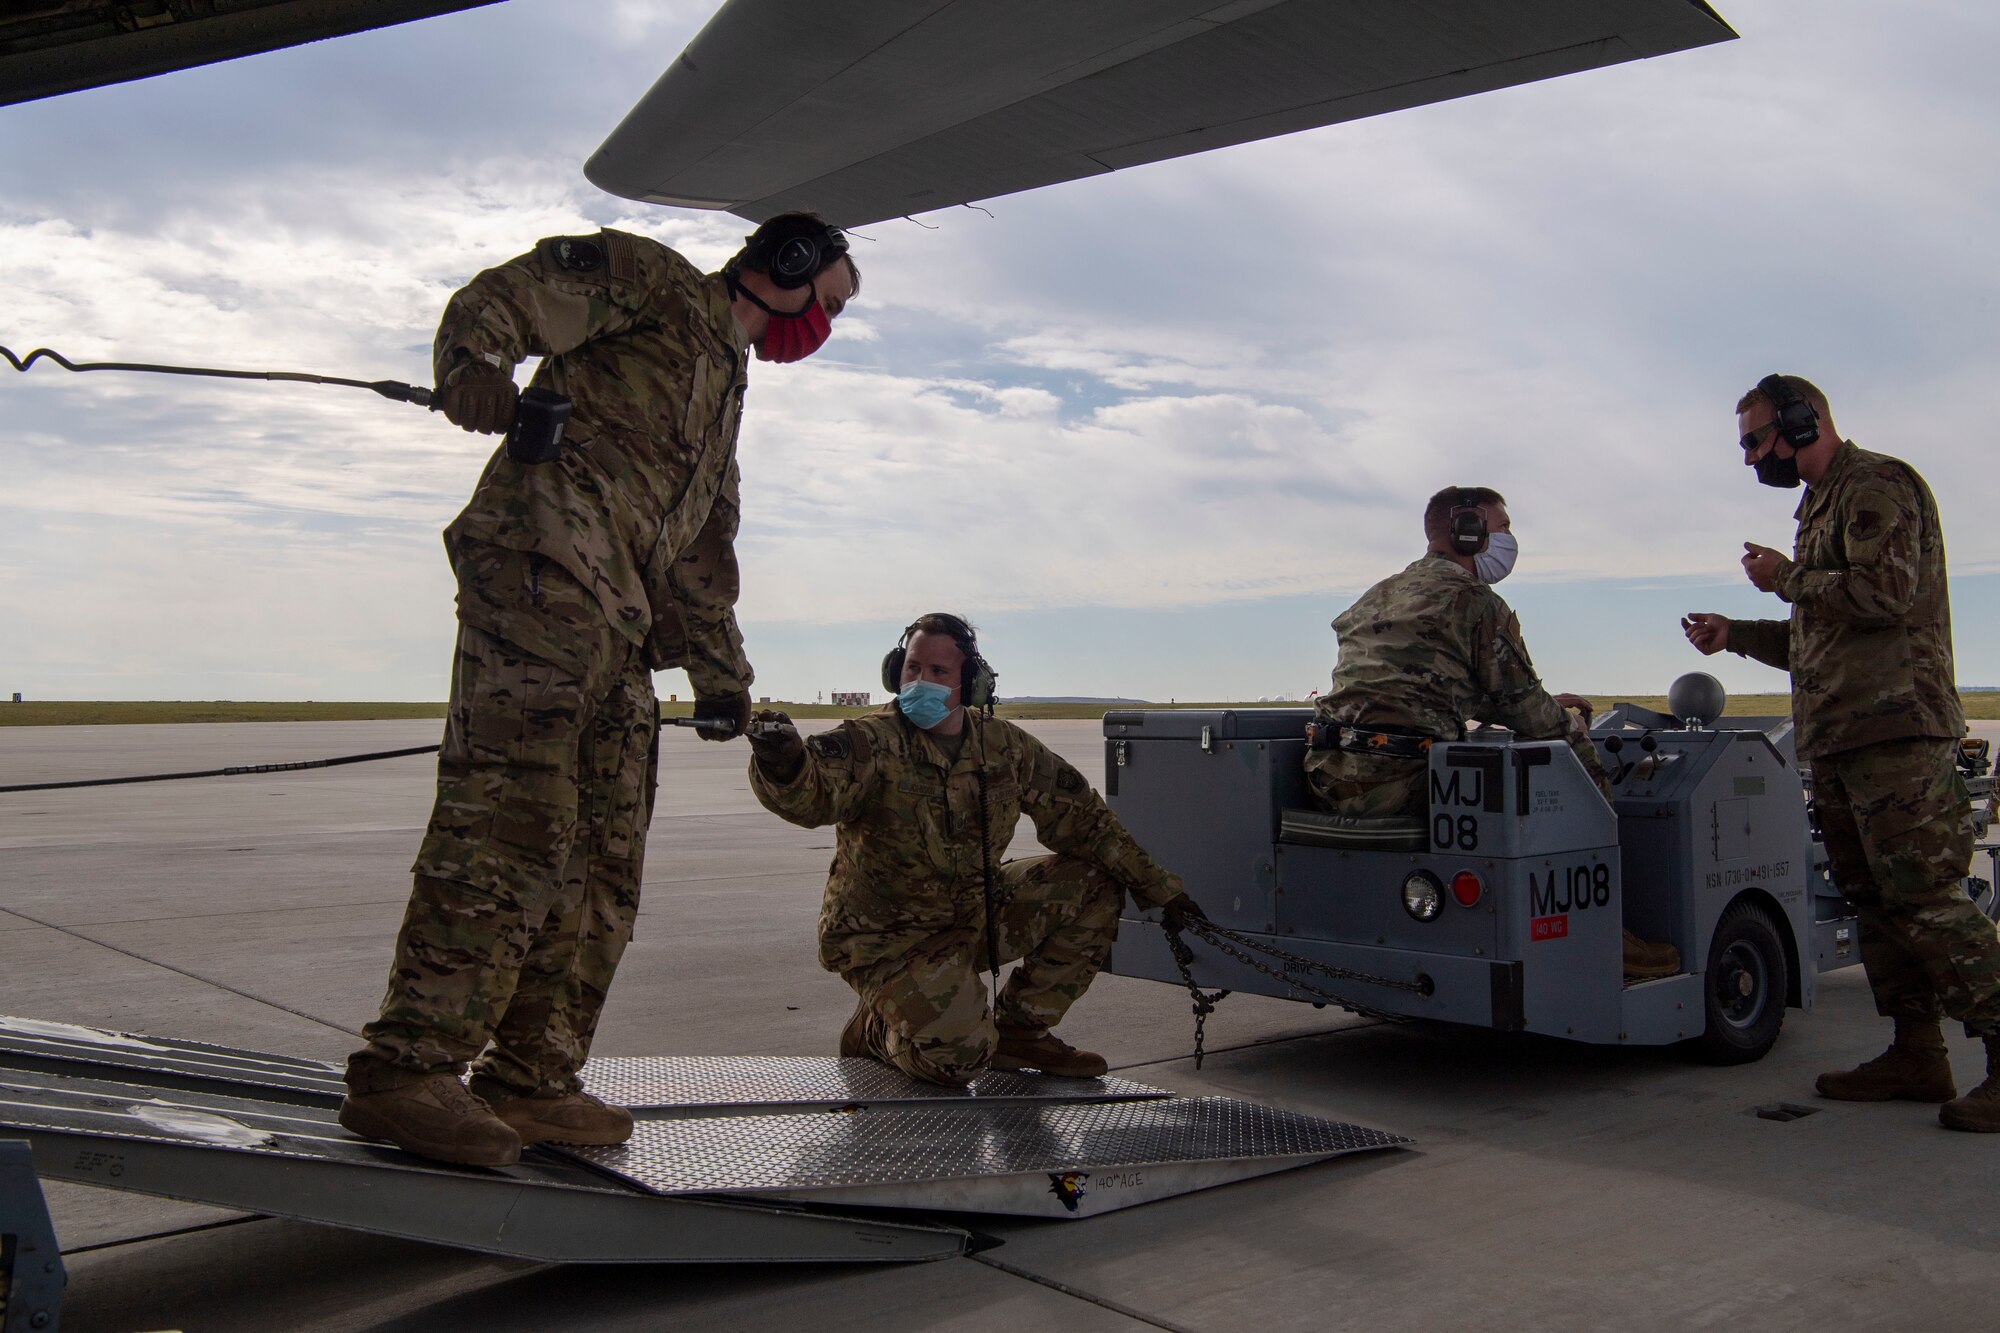 Members from the 41st Airlift Squadron and the 140th Wing, Colorado Air National Guard load cargo onto a C-130J Super Hercules during pre-deployment training at Buckley Air Force Base, Colorado, July 27, 2020. The 4/12 deployment initiative, which was developed in 2019 between airlift squadrons from Dyess AFB, Texas and Little Rock AFB, allowing each squadron a full year of dwell time followed by a four-month rotation to their respective area of responsibility. (U.S. Air Force photo by Airman 1st Class Aaron Irvin)